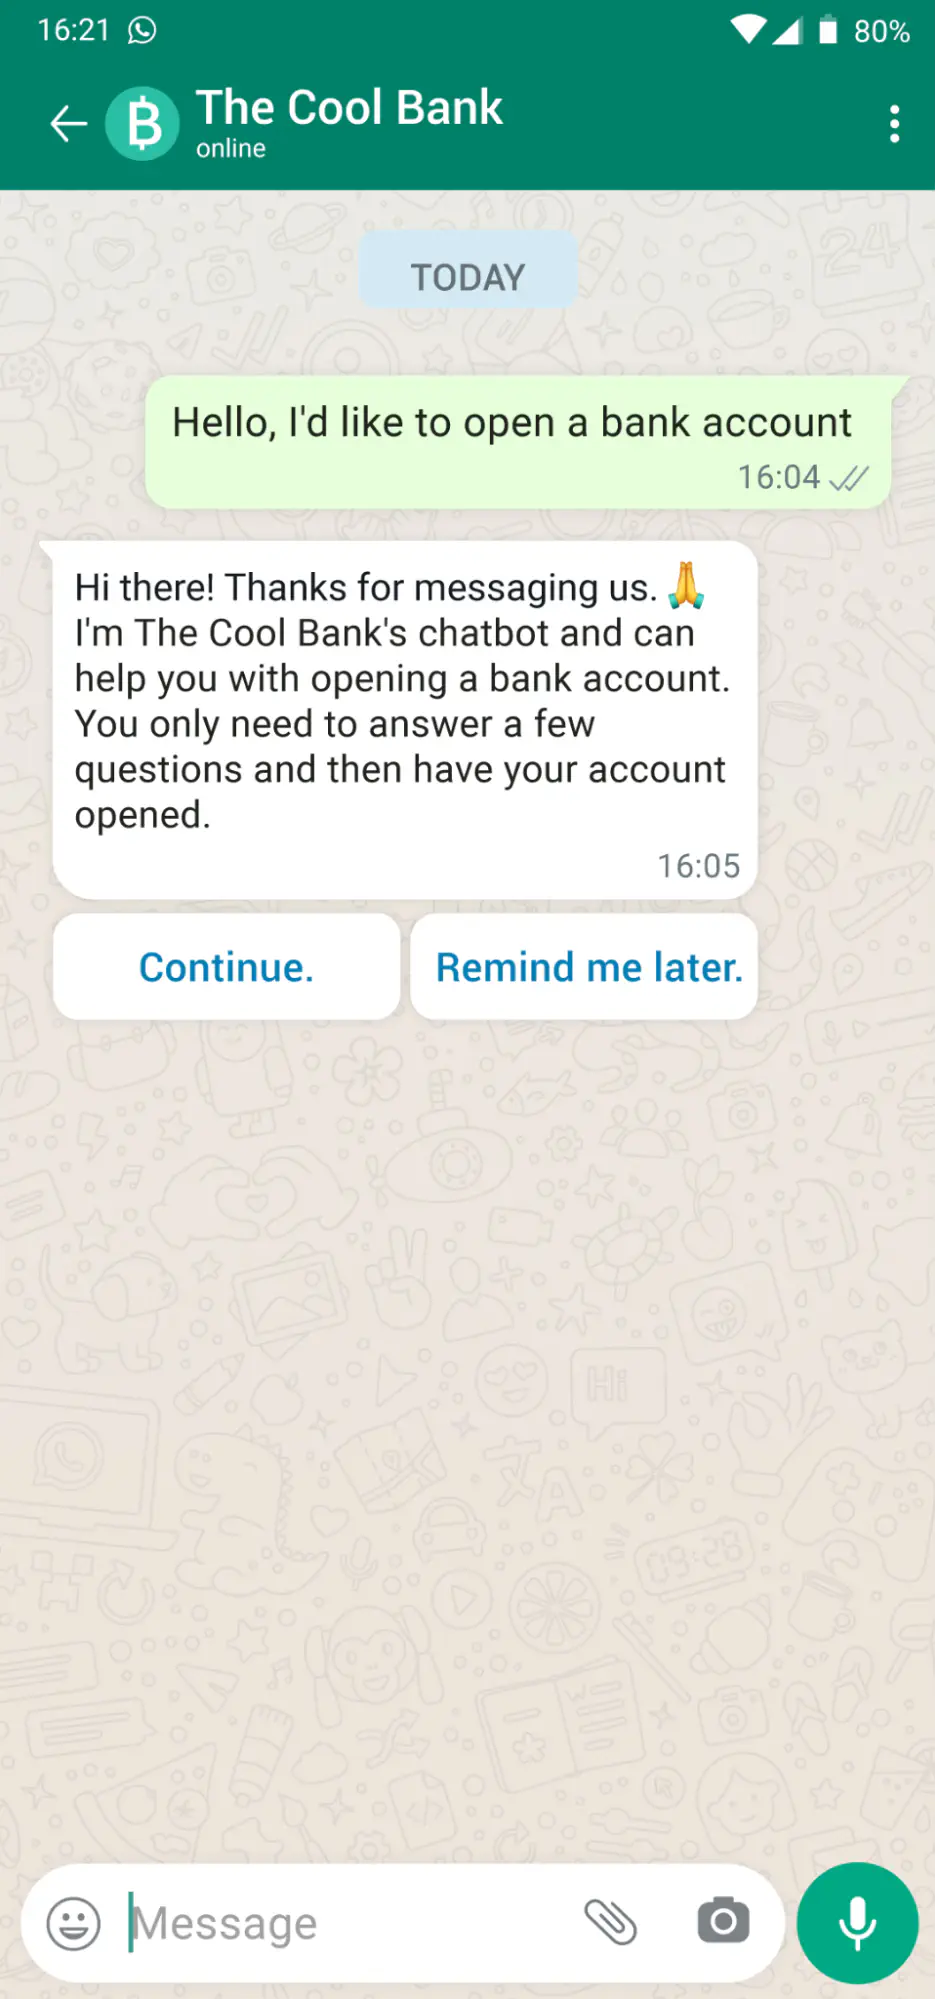 WhatsApp Conversation with a bank chatbot.